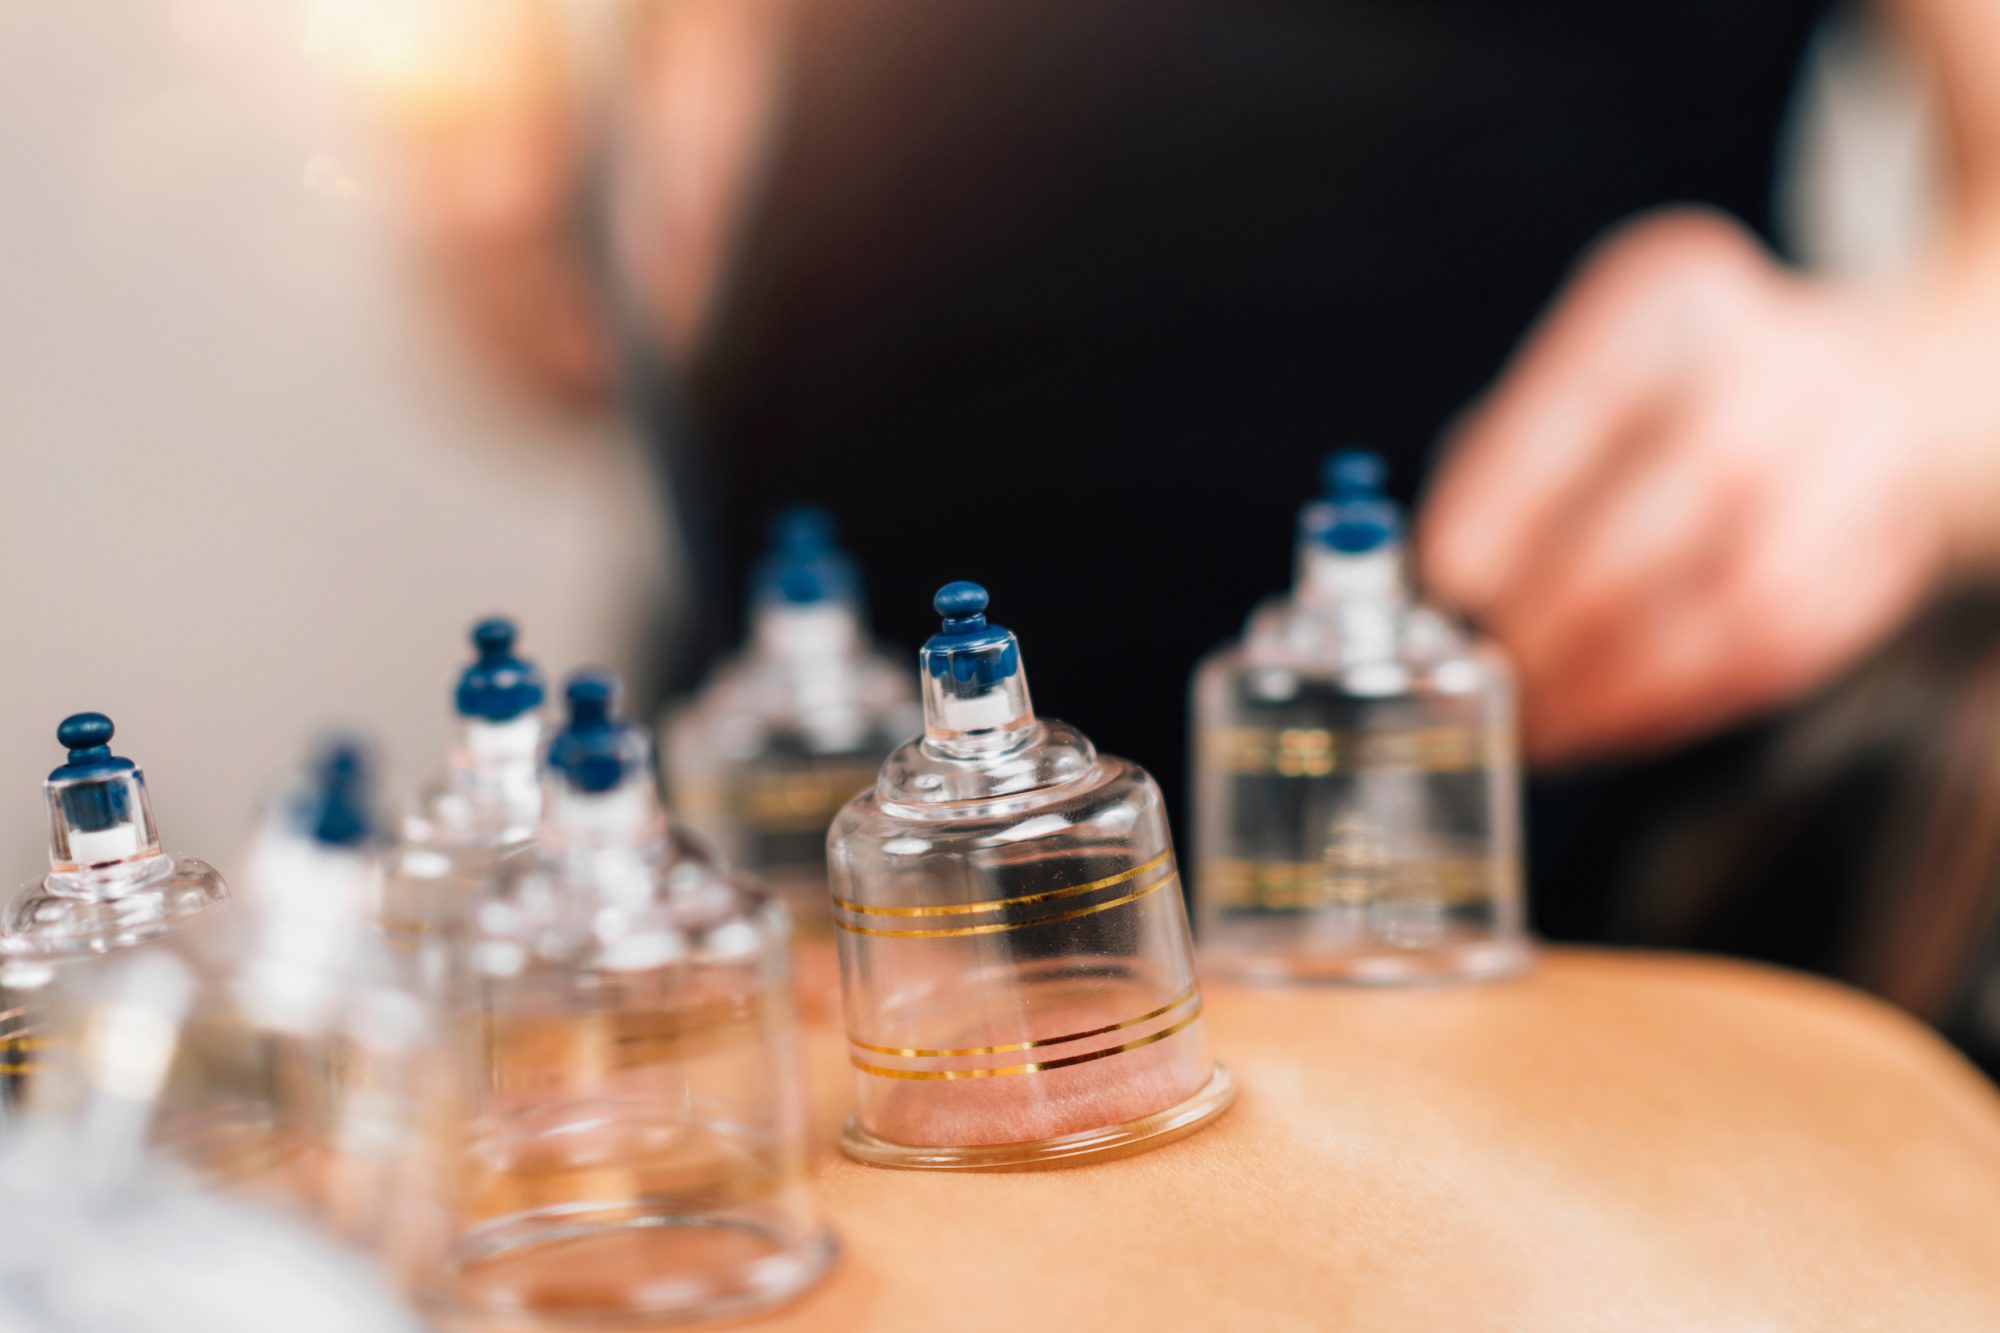 Truth of the rumors about cupping and the Covid vaccine